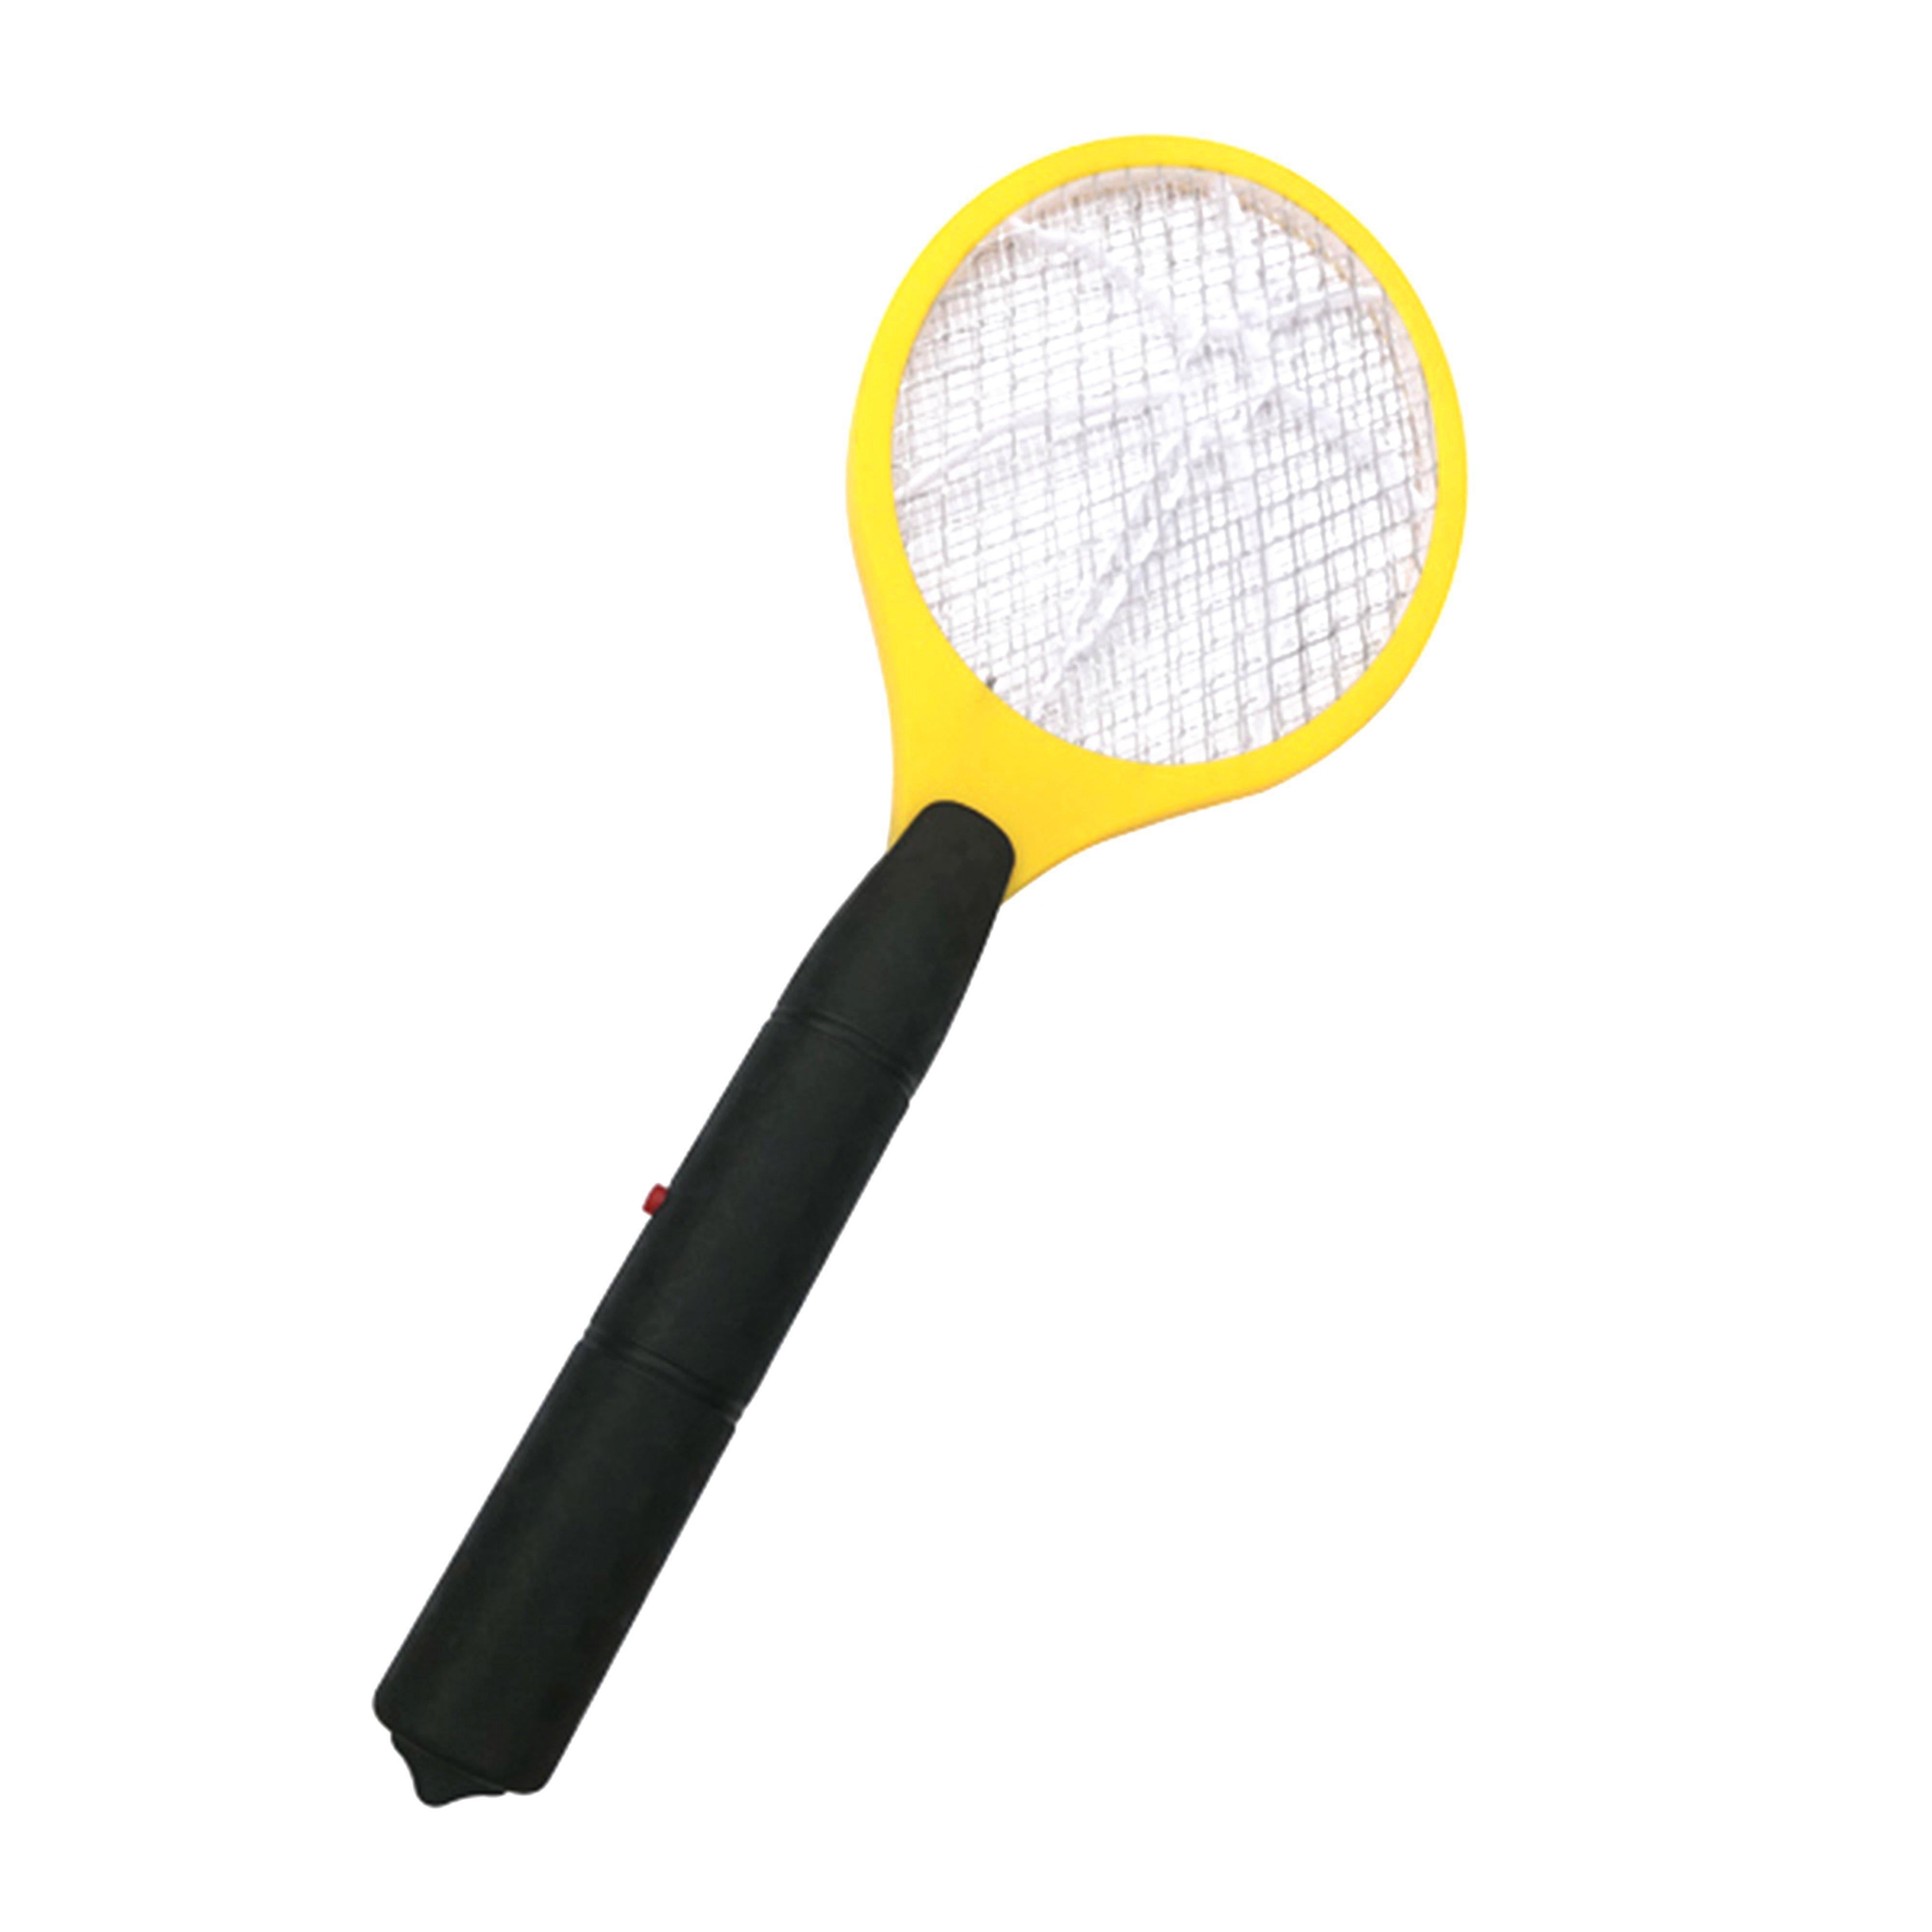 Quest Racket Fly Zapper Review